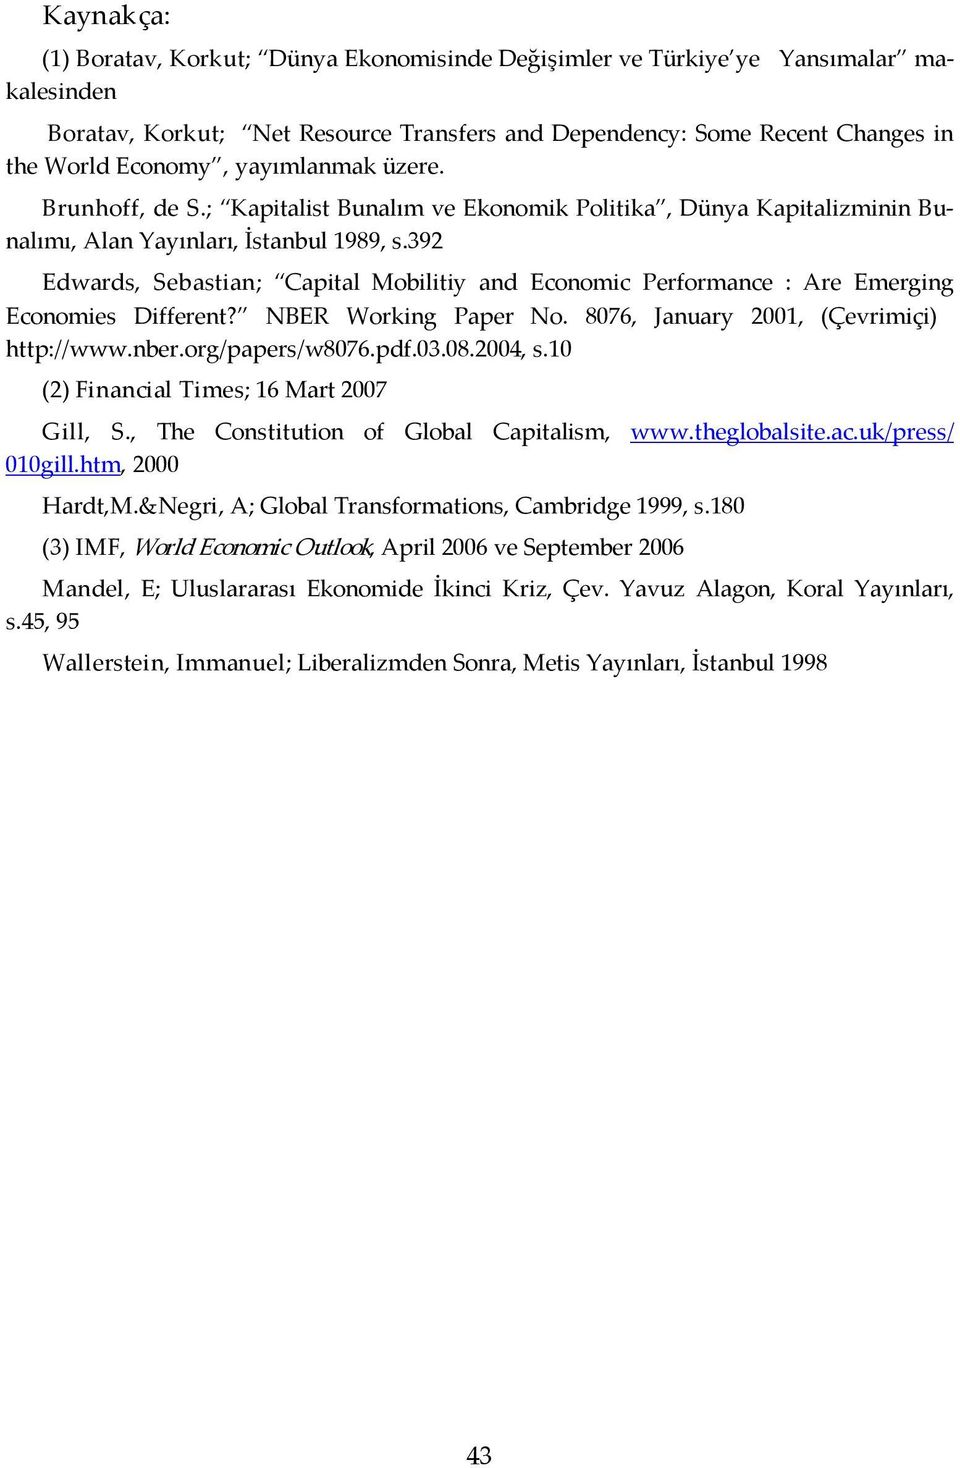 392 Edwards, Sebastian; Capital Mobilitiy and Economic Performance : Are Emerging Economies Different? NBER Working Paper No. 8076, January 2001, (Çevrimiçi) http://www.nber.org/papers/w8076.pdf.03.